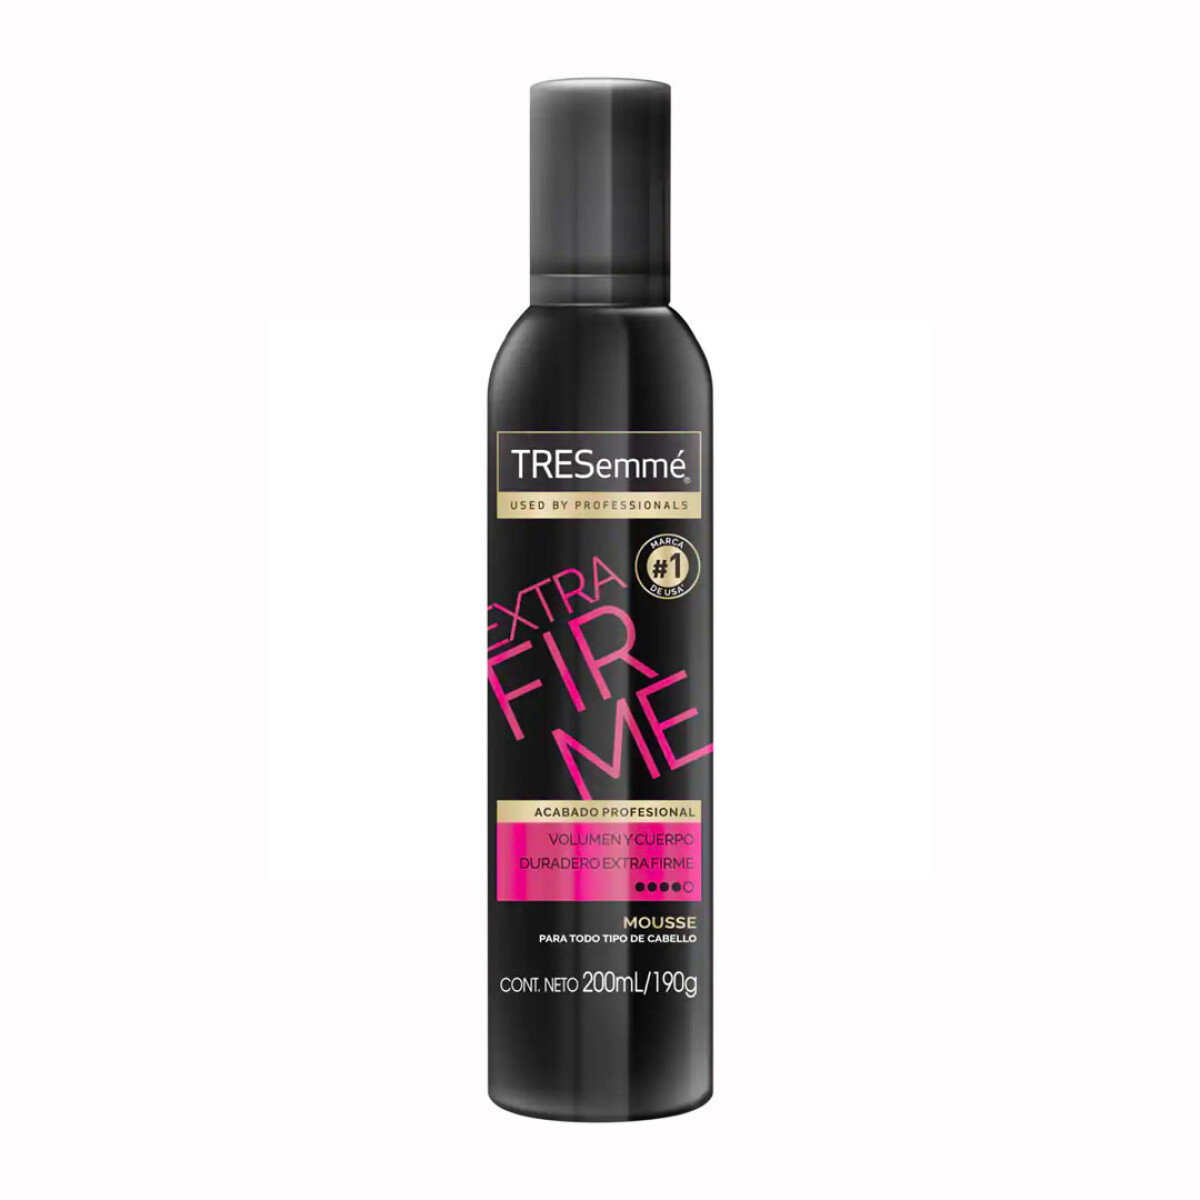 Mousse TRESemme Extra Firme - 200ml 